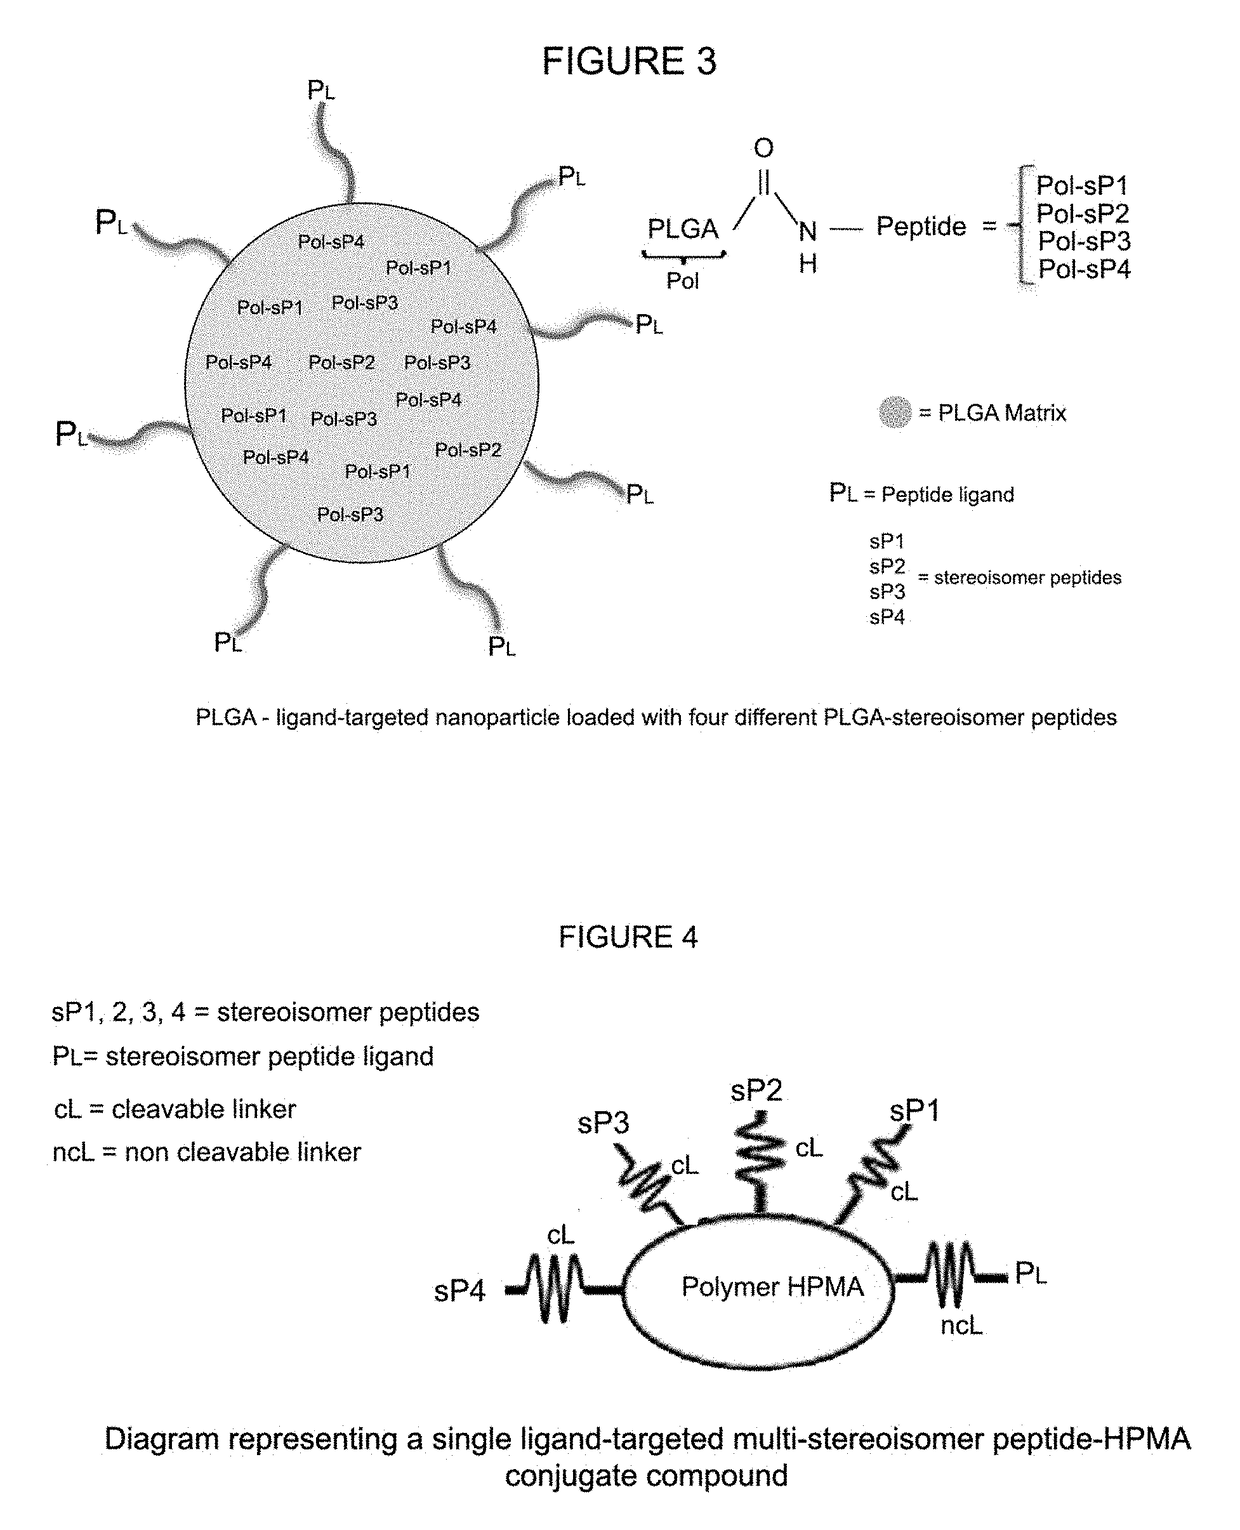 Stereoisomer peptides, their polymer conjugates, their encapsulation into nanoparticles, and uses thereof for the treatment of diseases caused by abnormal angiogenesis